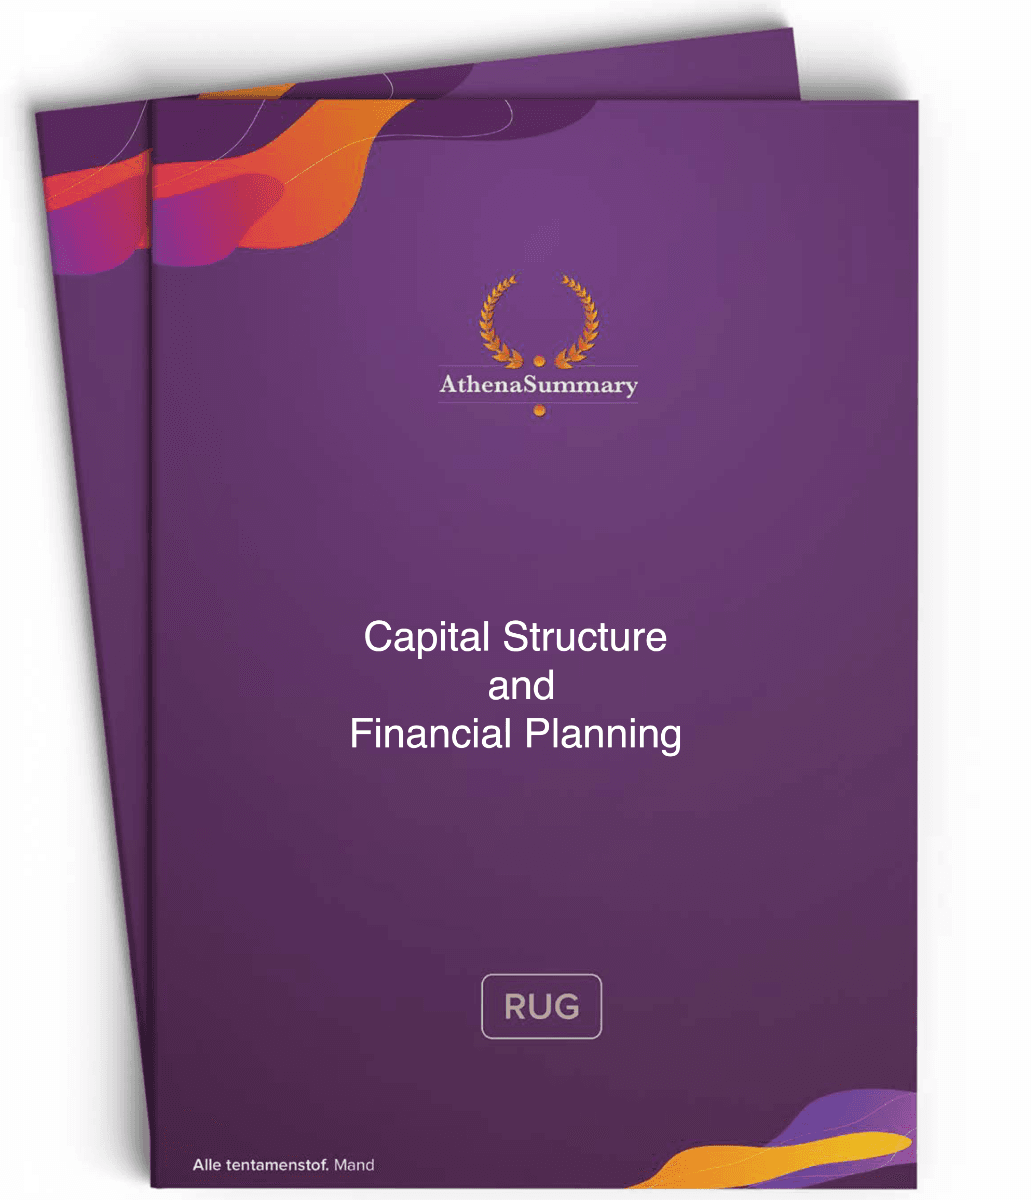 Literature Summary: Capital Structure and Financial Planning